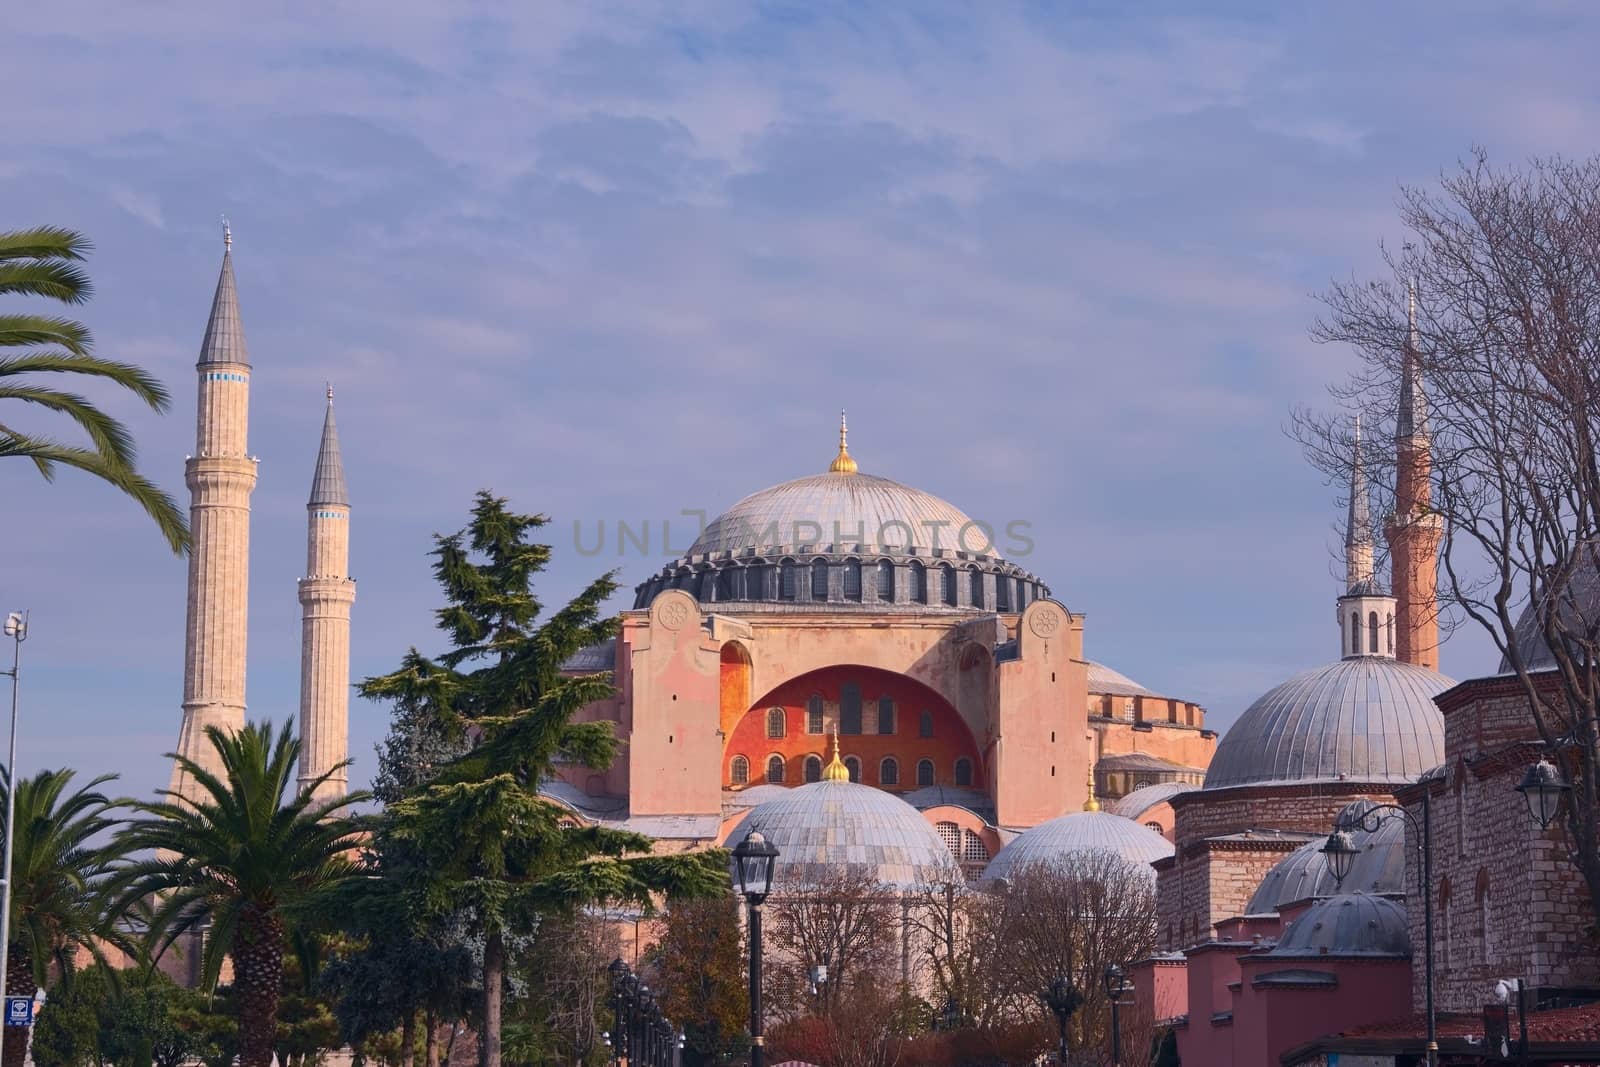 Hagia Sophia, located in Istanbul, Turkey. One the most important religious monuments in the world.